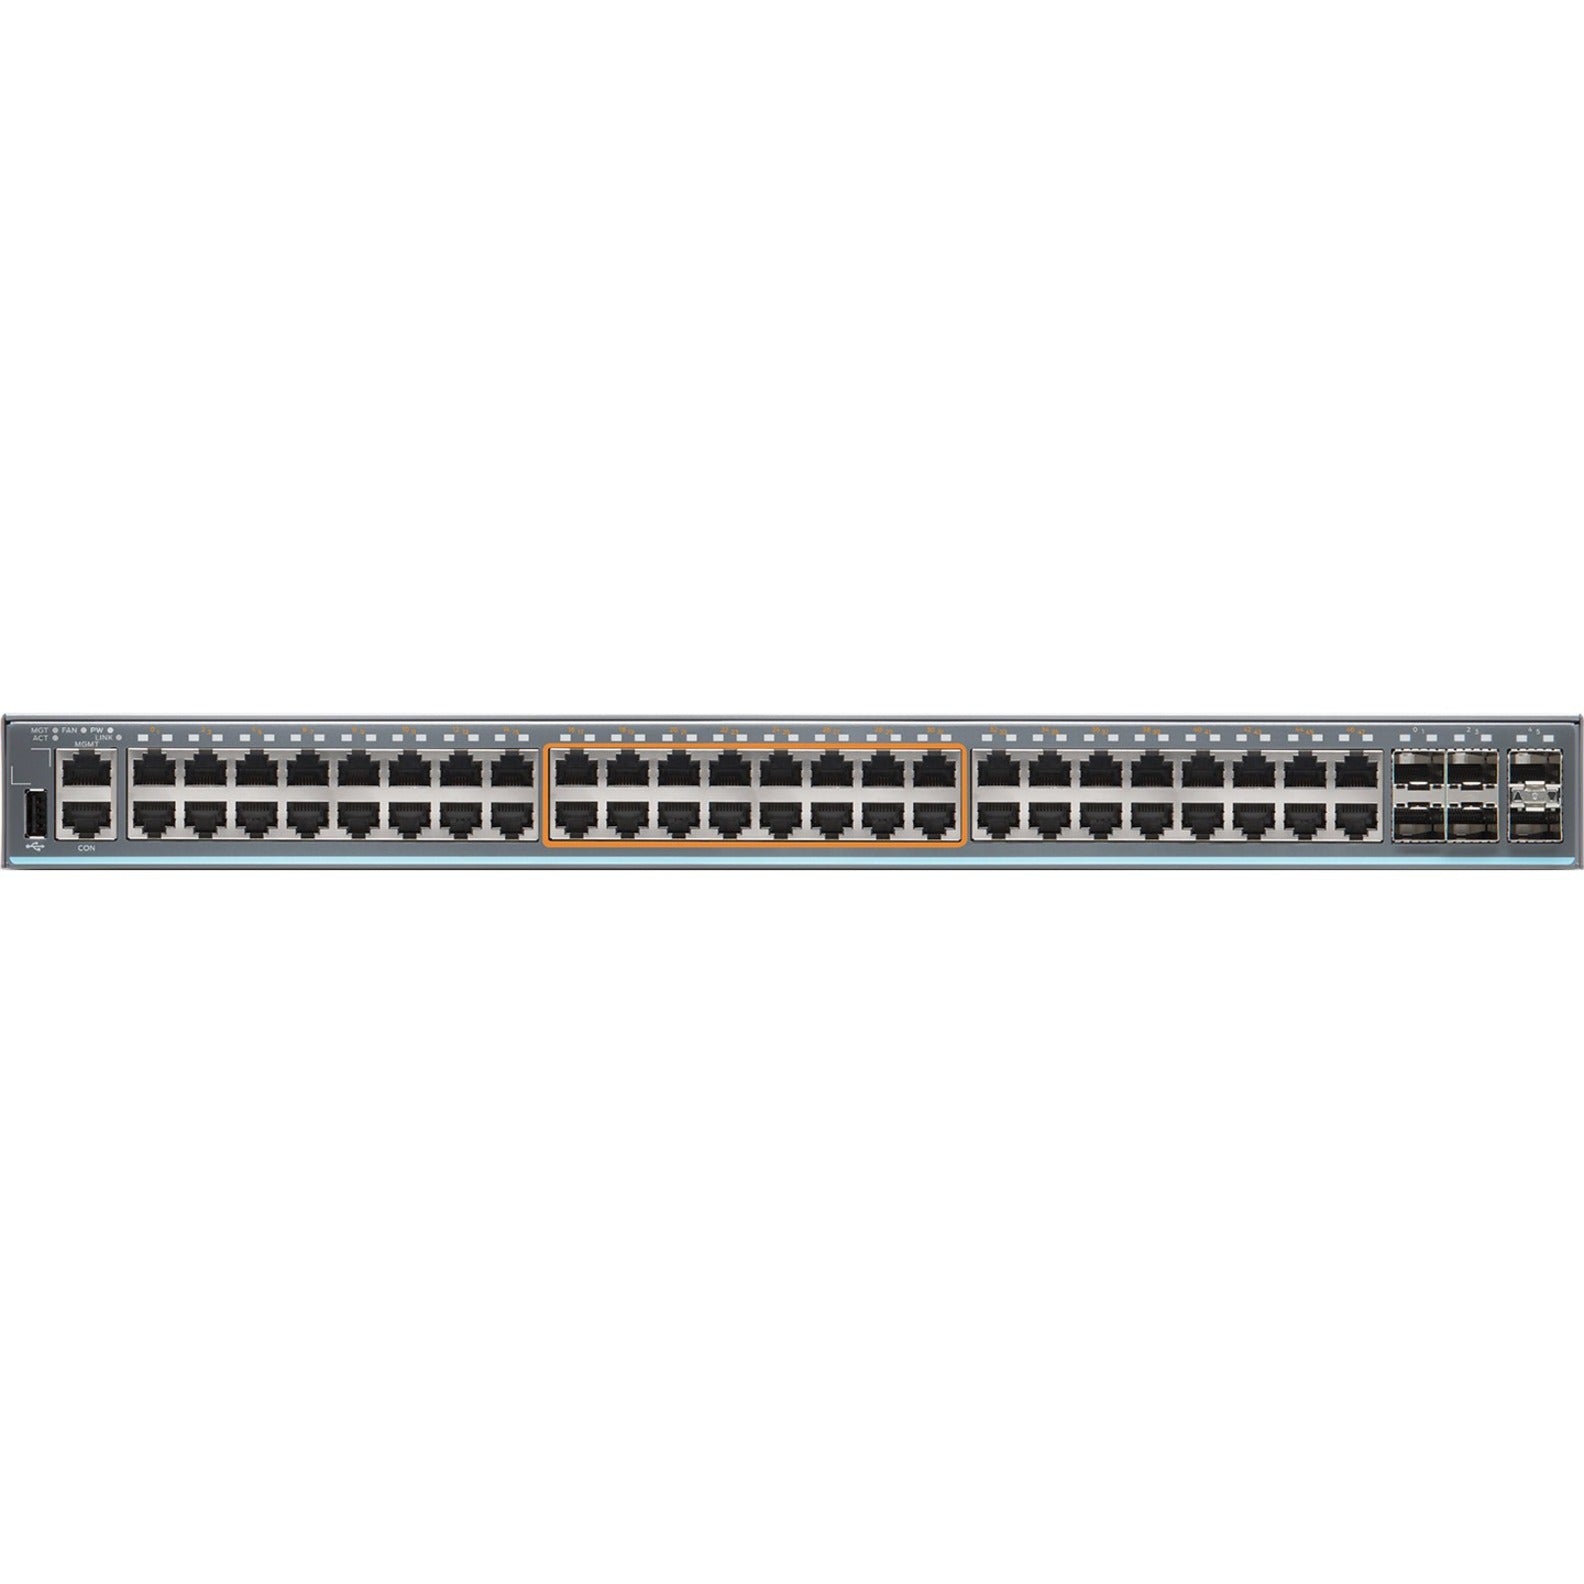 Juniper EX2300-48MP Ethernet Switch, Layer 3 Switch, 48 Network Ports, 10/100/1000Base-T, 2.5GBase-T, 10GBase-X, Optical Fiber, Twisted Pair